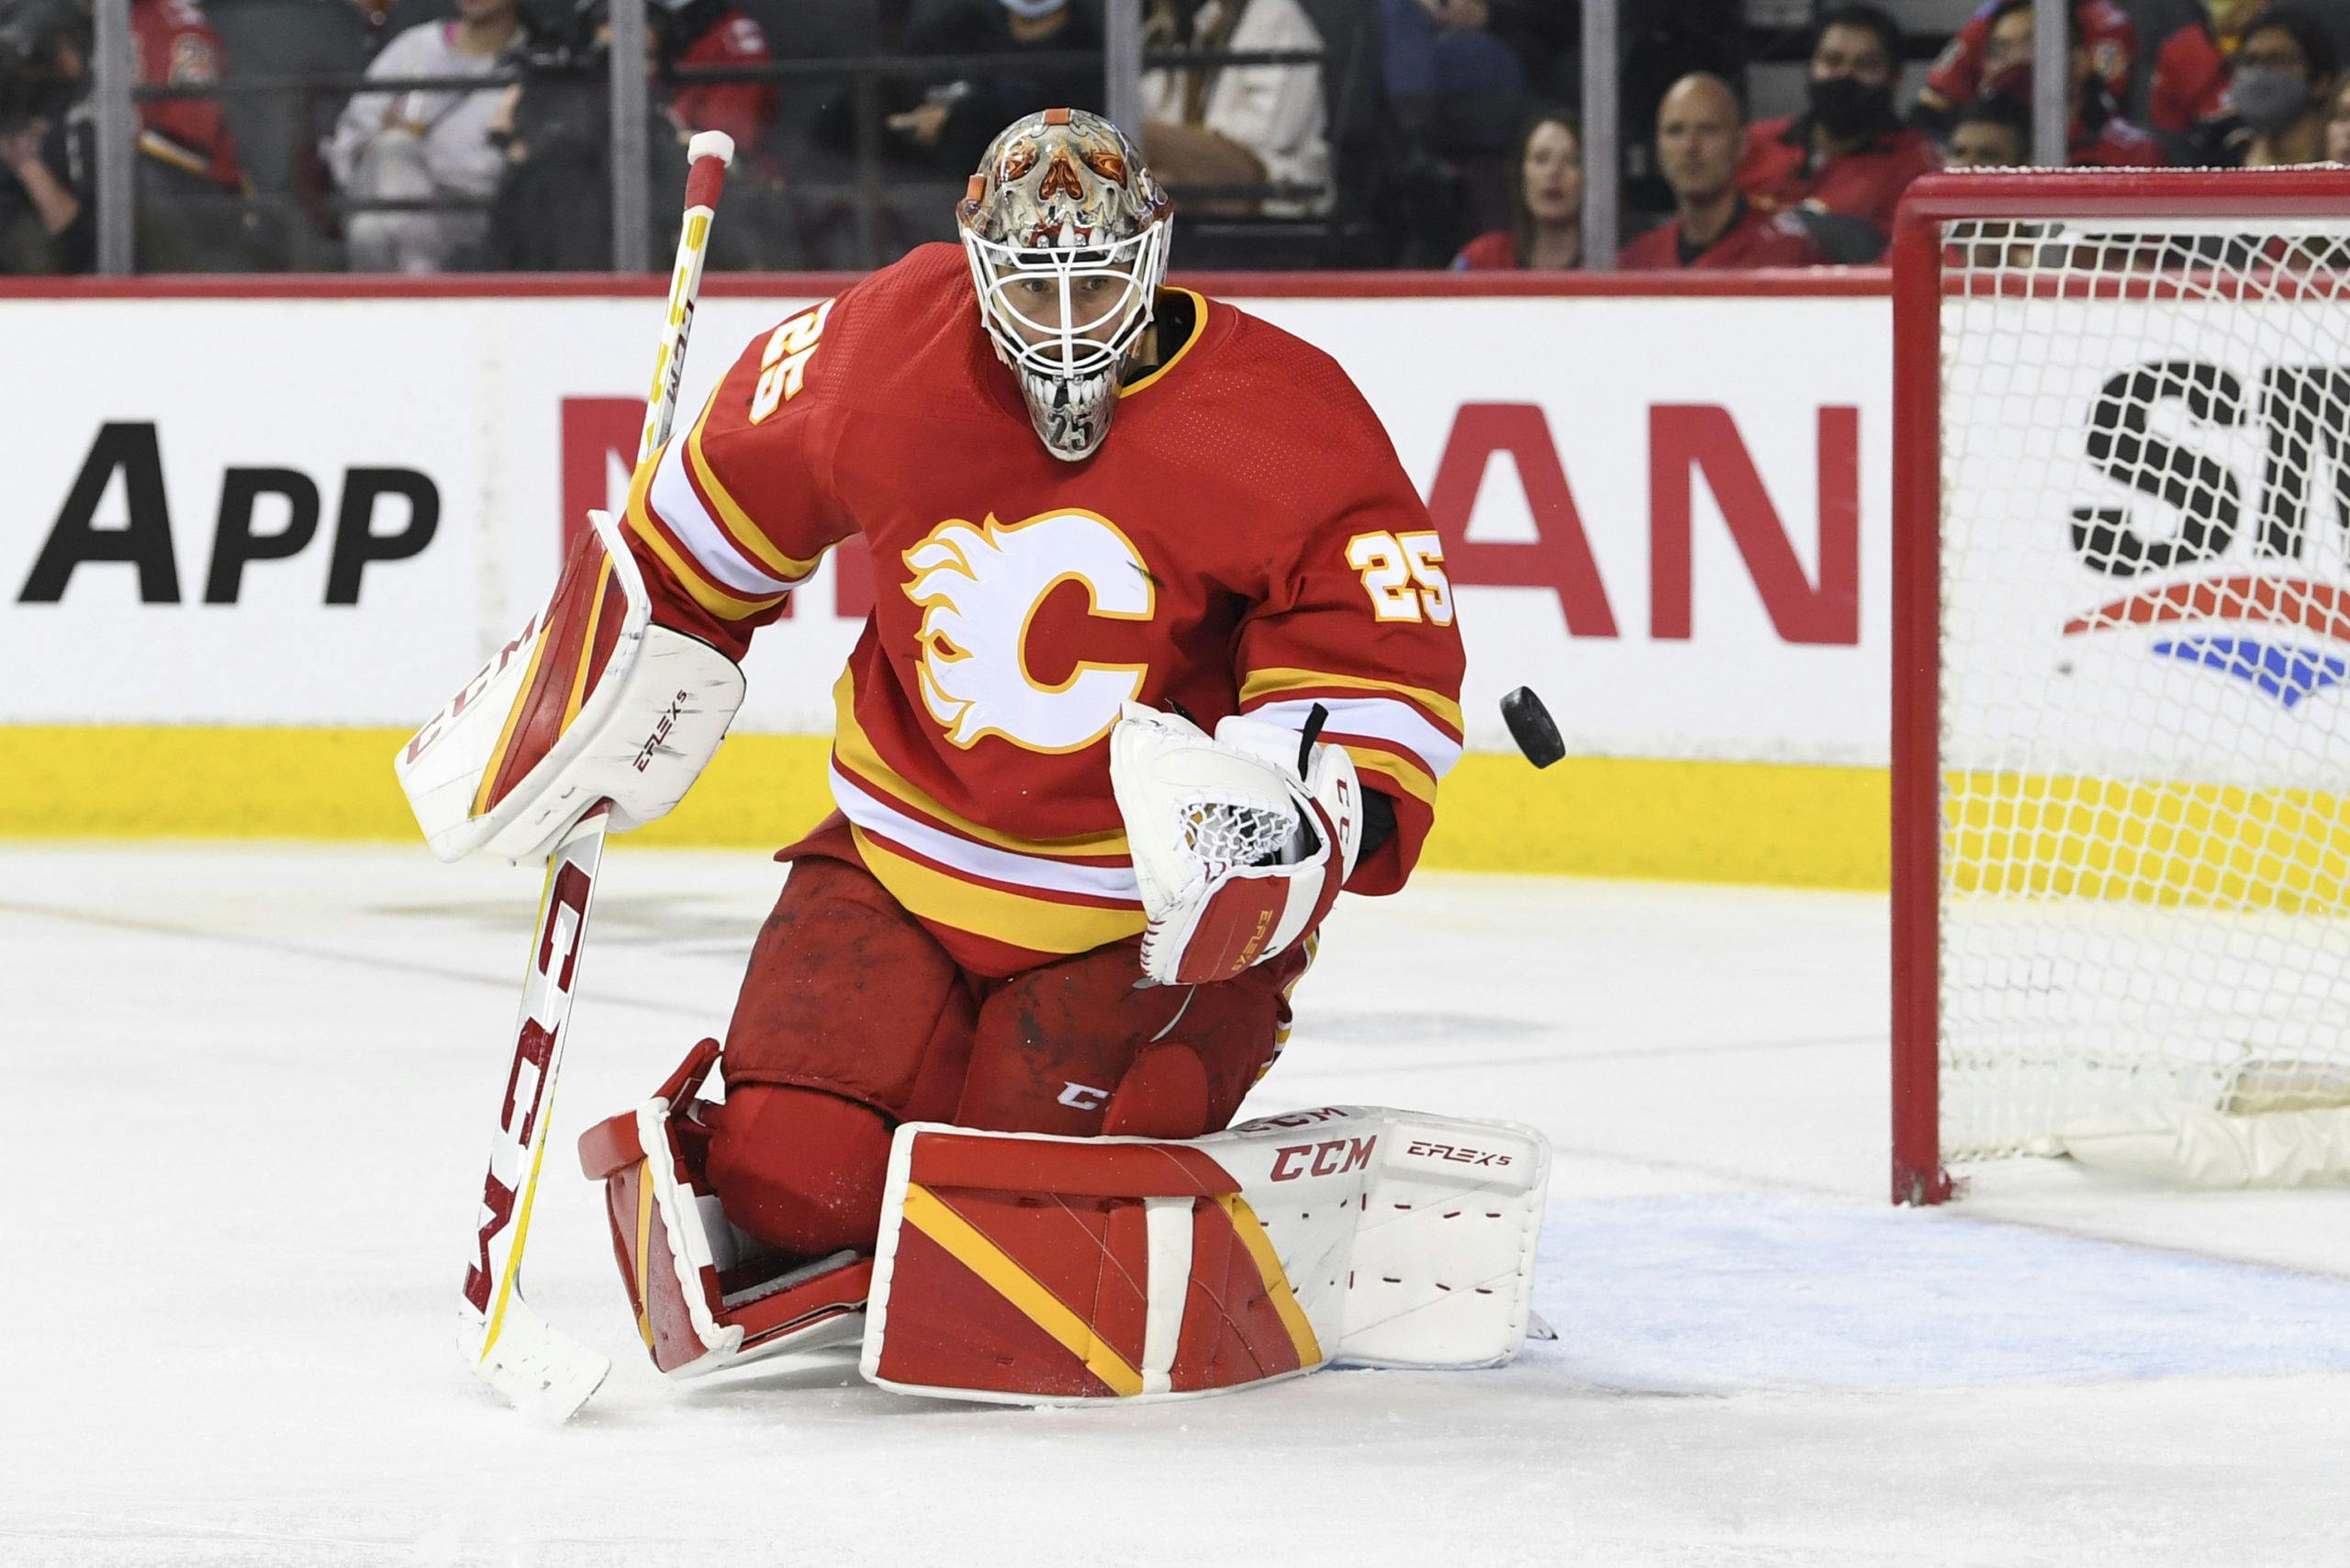 Jacob Markstrom Earns Shutout, Flames Get First Win With 3-0